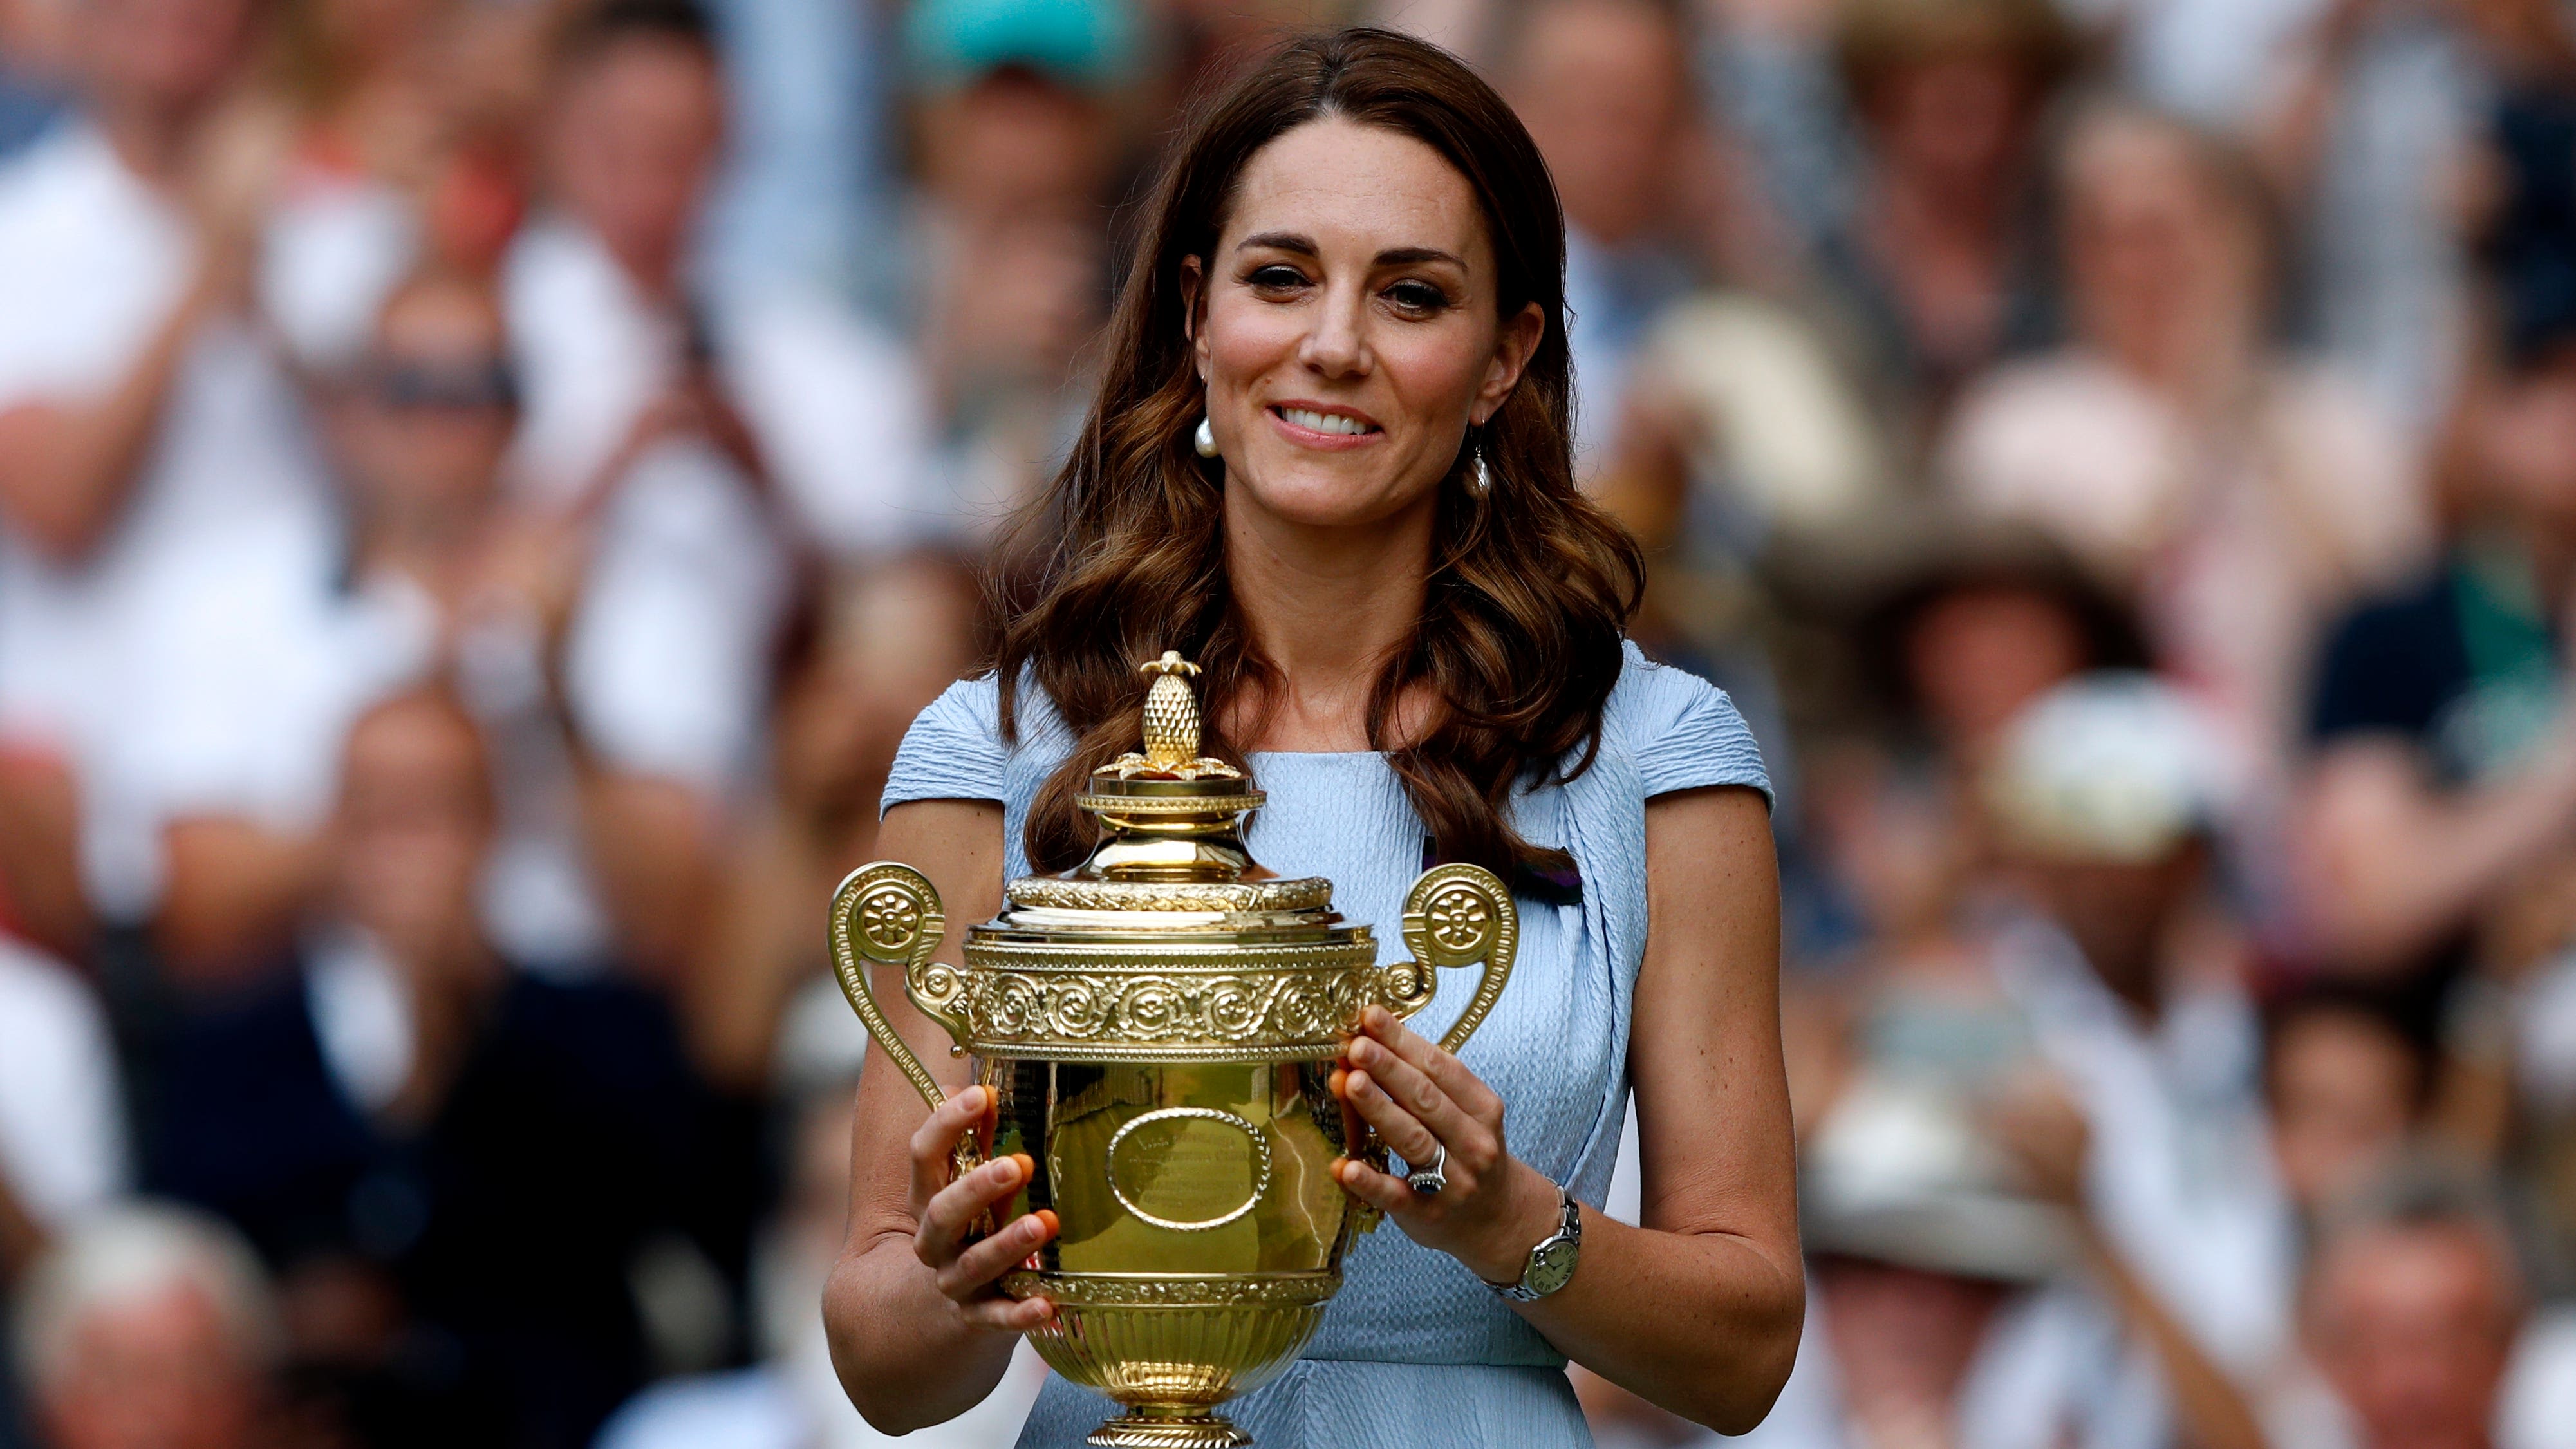 Princess of Wales to attend Wimbledon men’s final and present trophy to winner